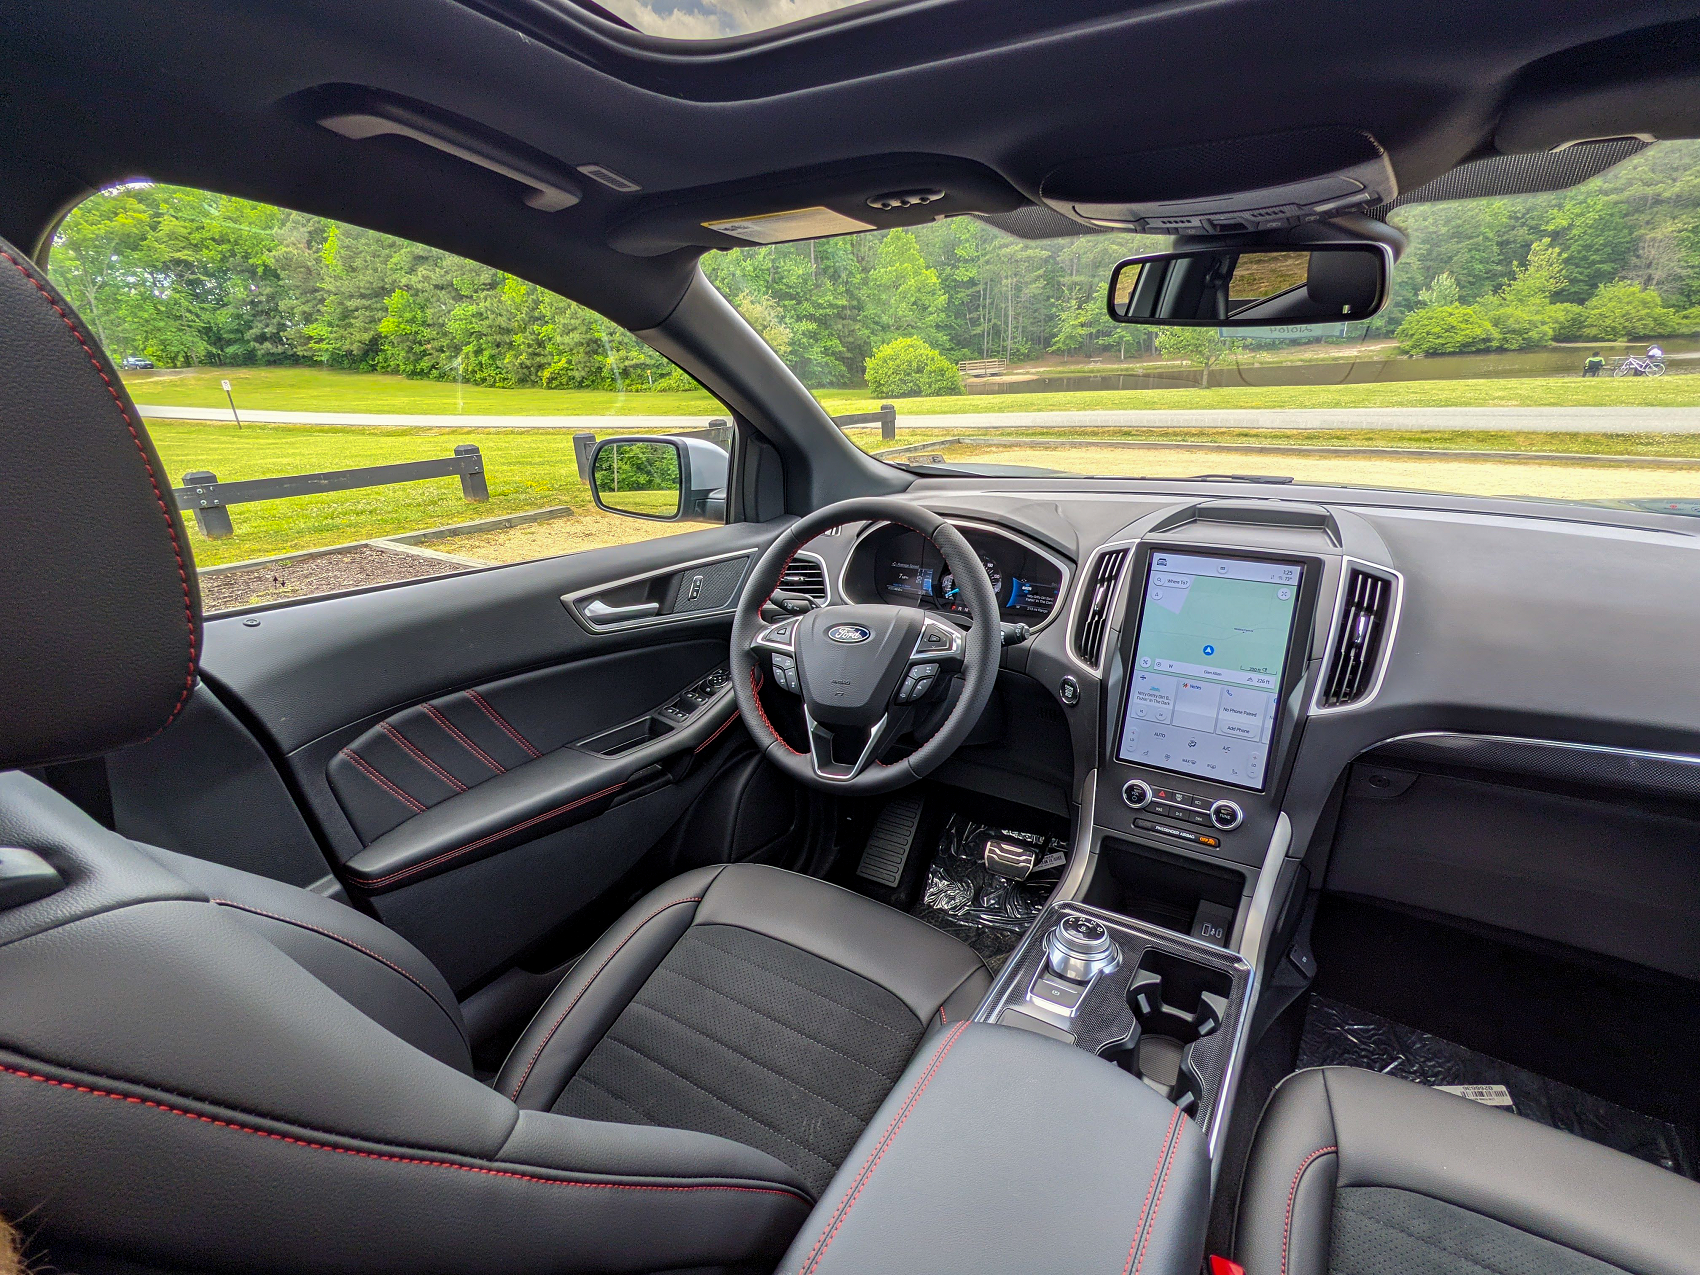 2021 Ford Edge Technology Features